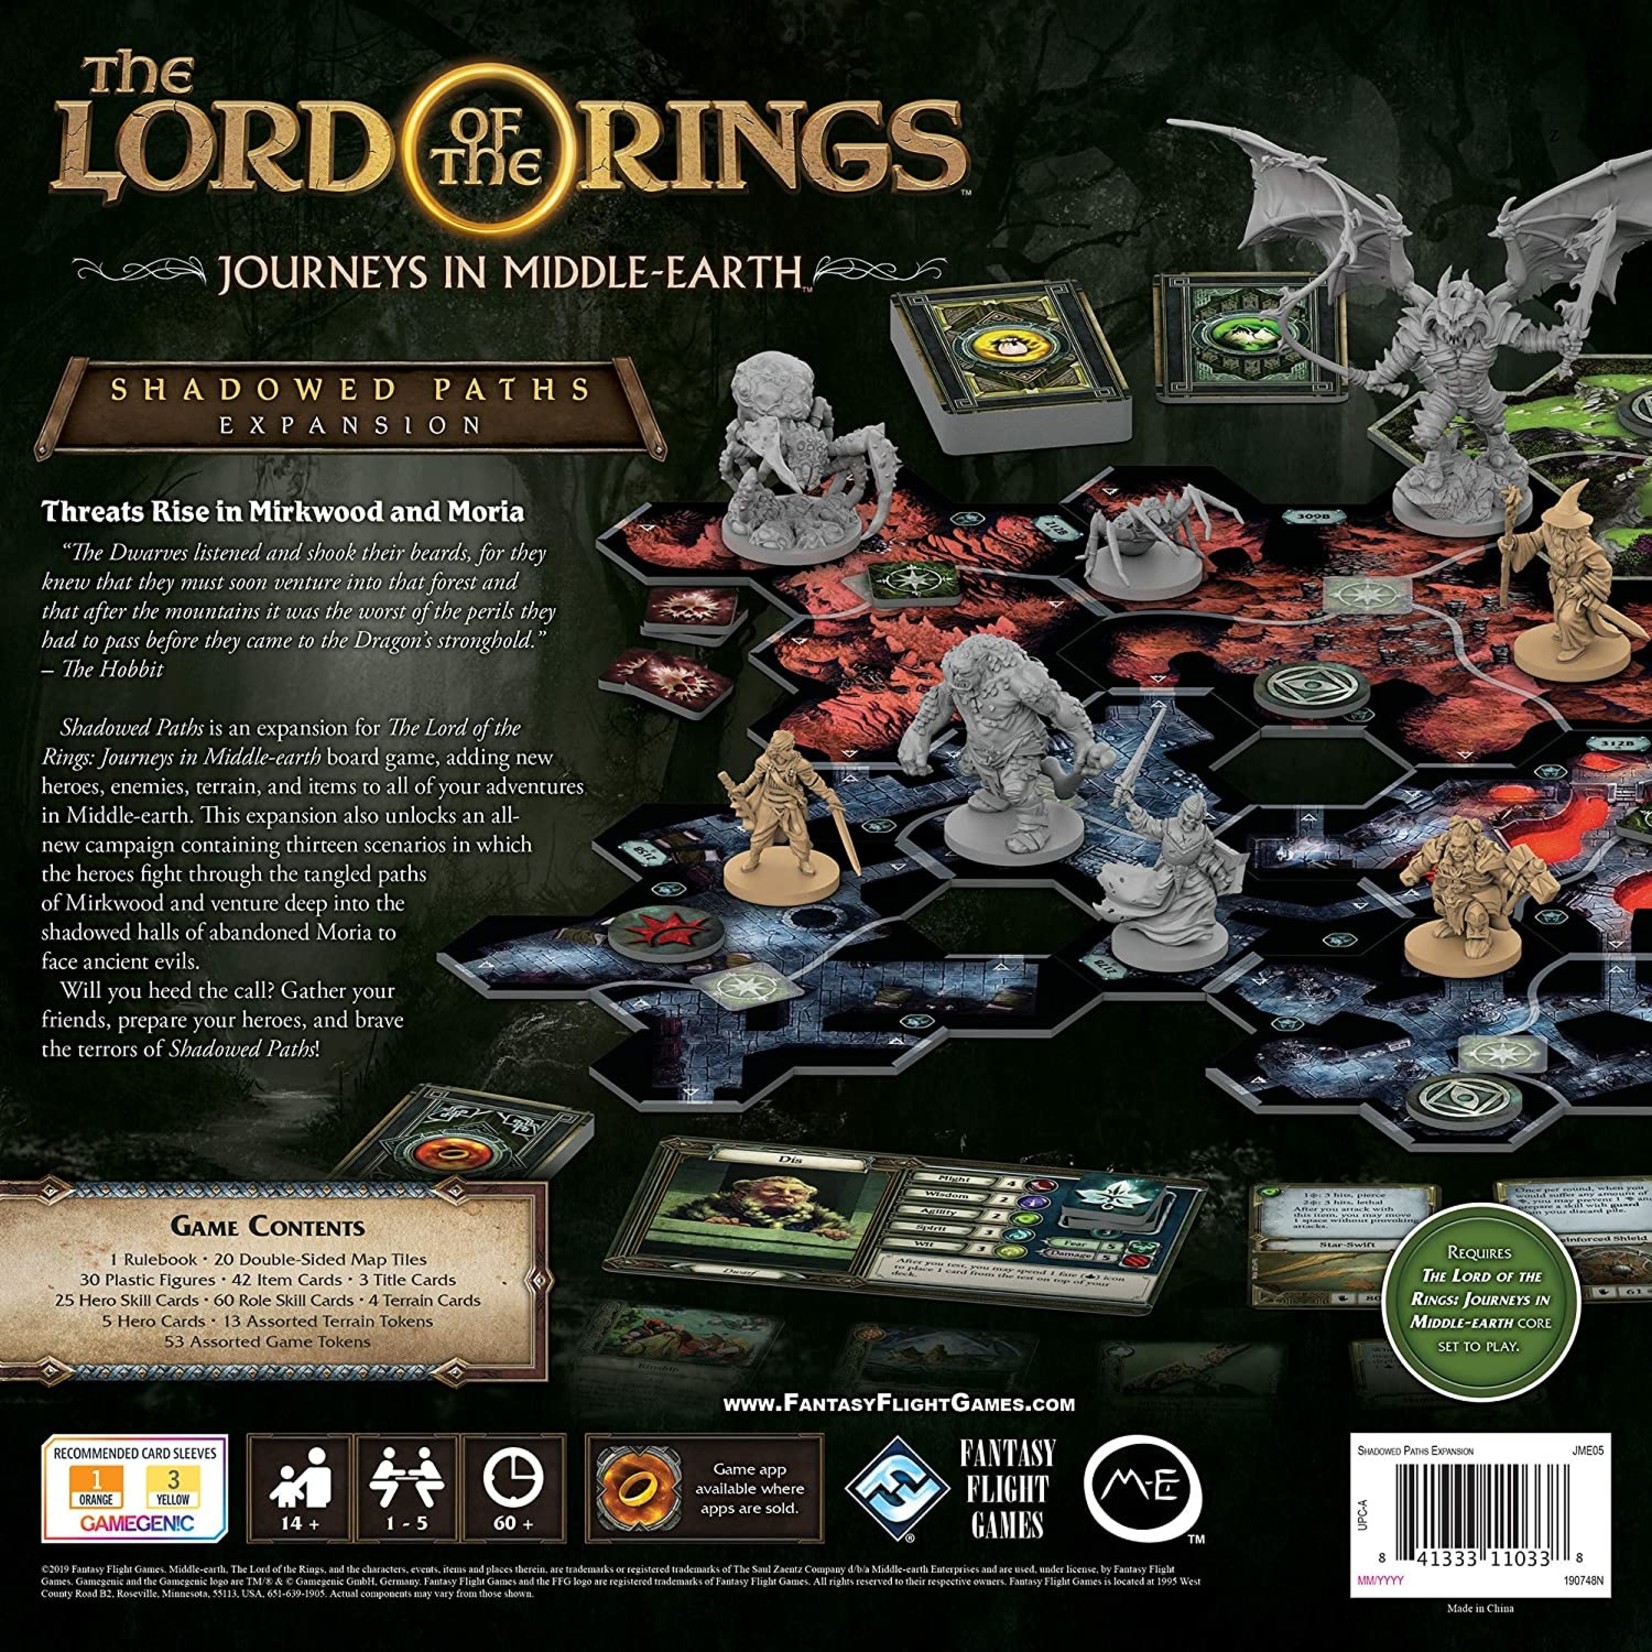 Fantasy Flight Games LOTR Journeys in Middle-Earth Shadowed Paths